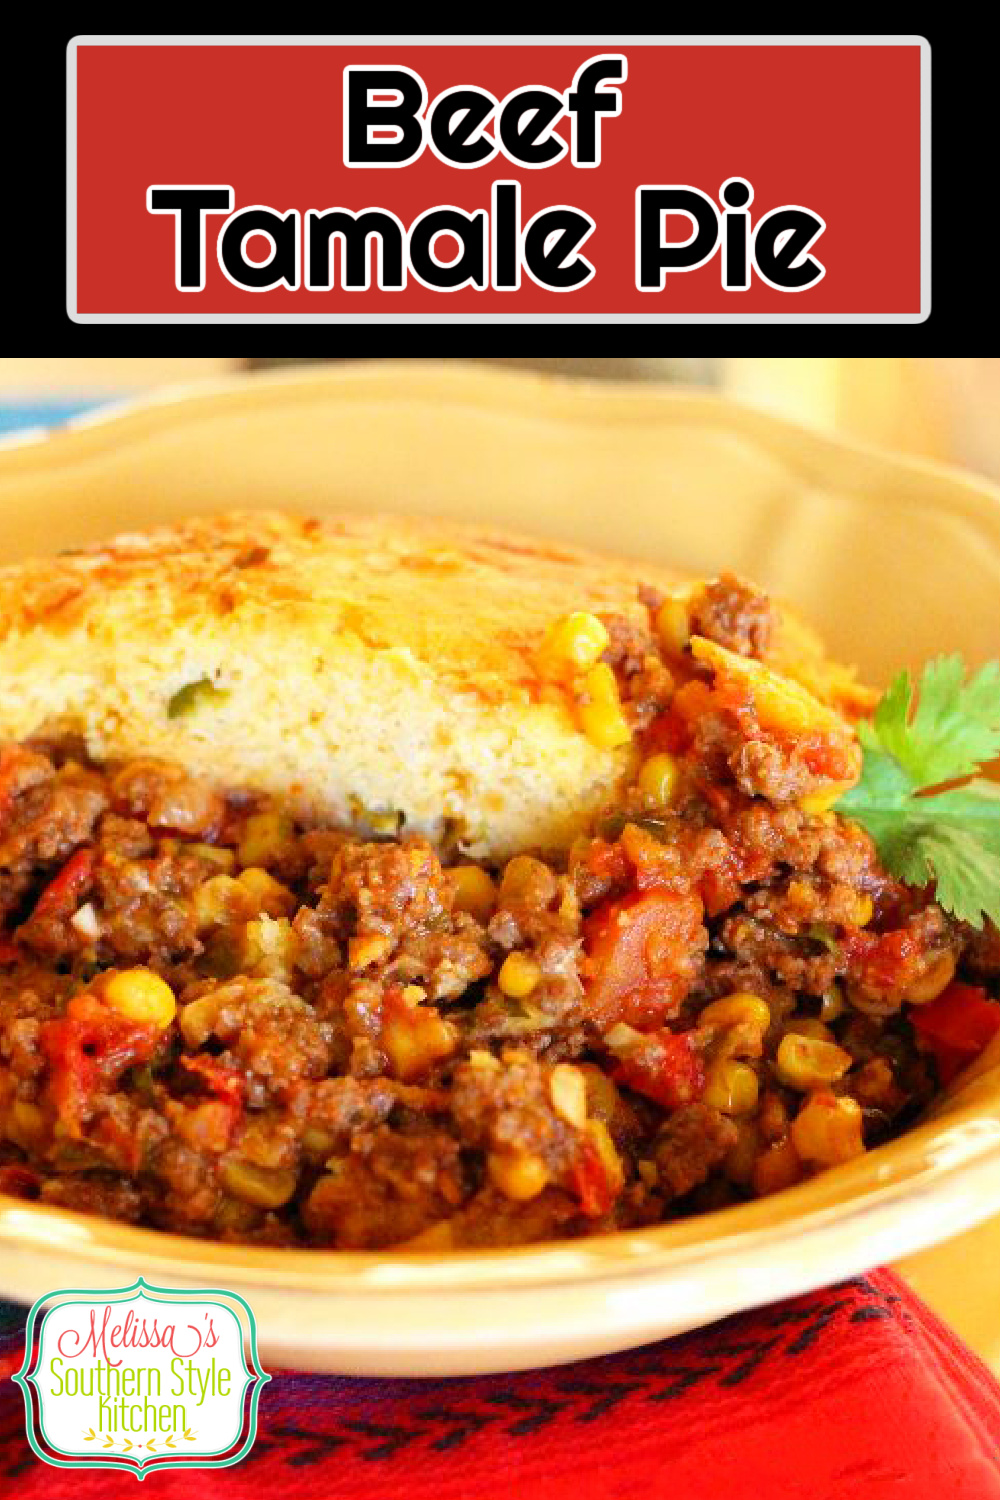 Top this green chile cornbread crusted Beef Tamale Pie with your favorite fixings and transform any meal into a homemade fiesta #beefrecipes #tamalepie #beeytamalepie #easygroundbeefrecipes #groundbeefrecipes #tamales #greenchilecornbread #cornbread via @melissasssk